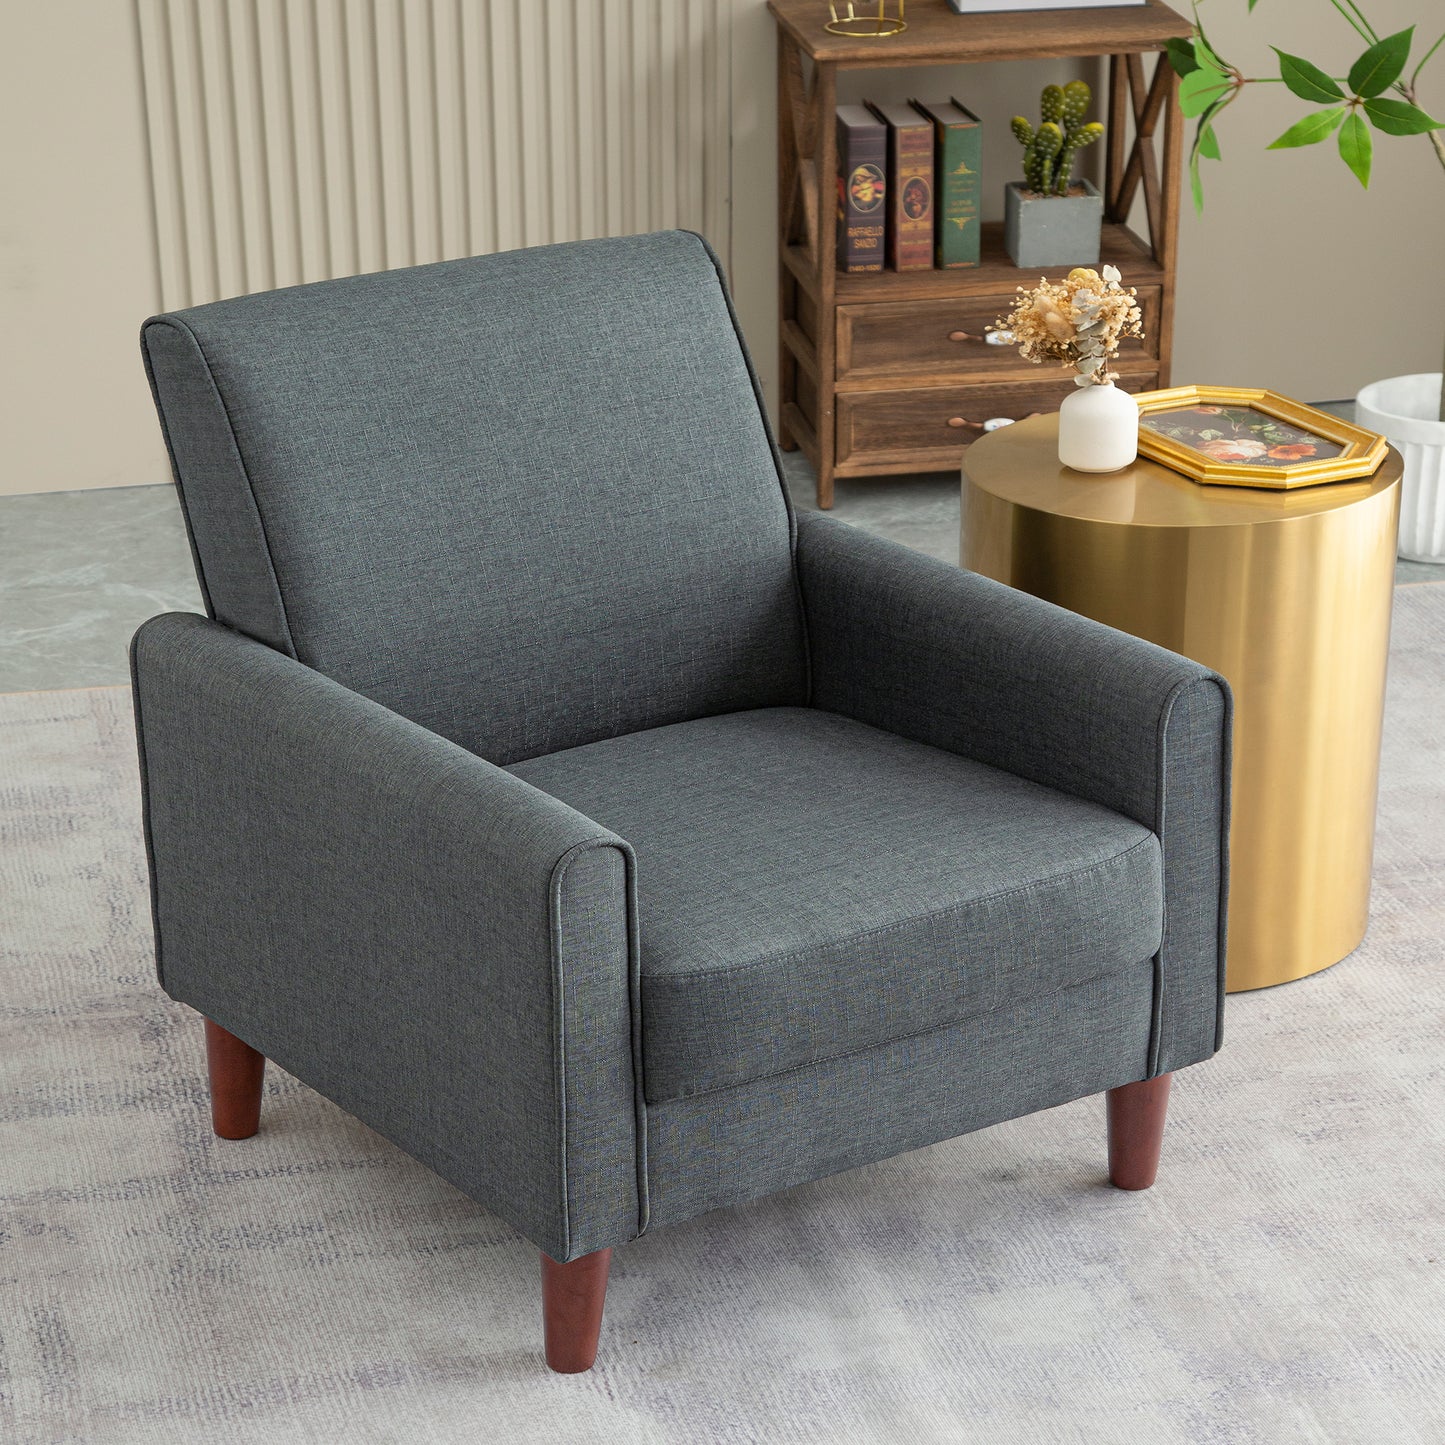 SYNGAR Accent Chair for Living Room, Bedroom Comfy Reading Armchair, Mid Century Modern Arm Chair Soft Linen Upholstered Cozy Side Single Sofa Chair Relaxing Seating, Dark Grey